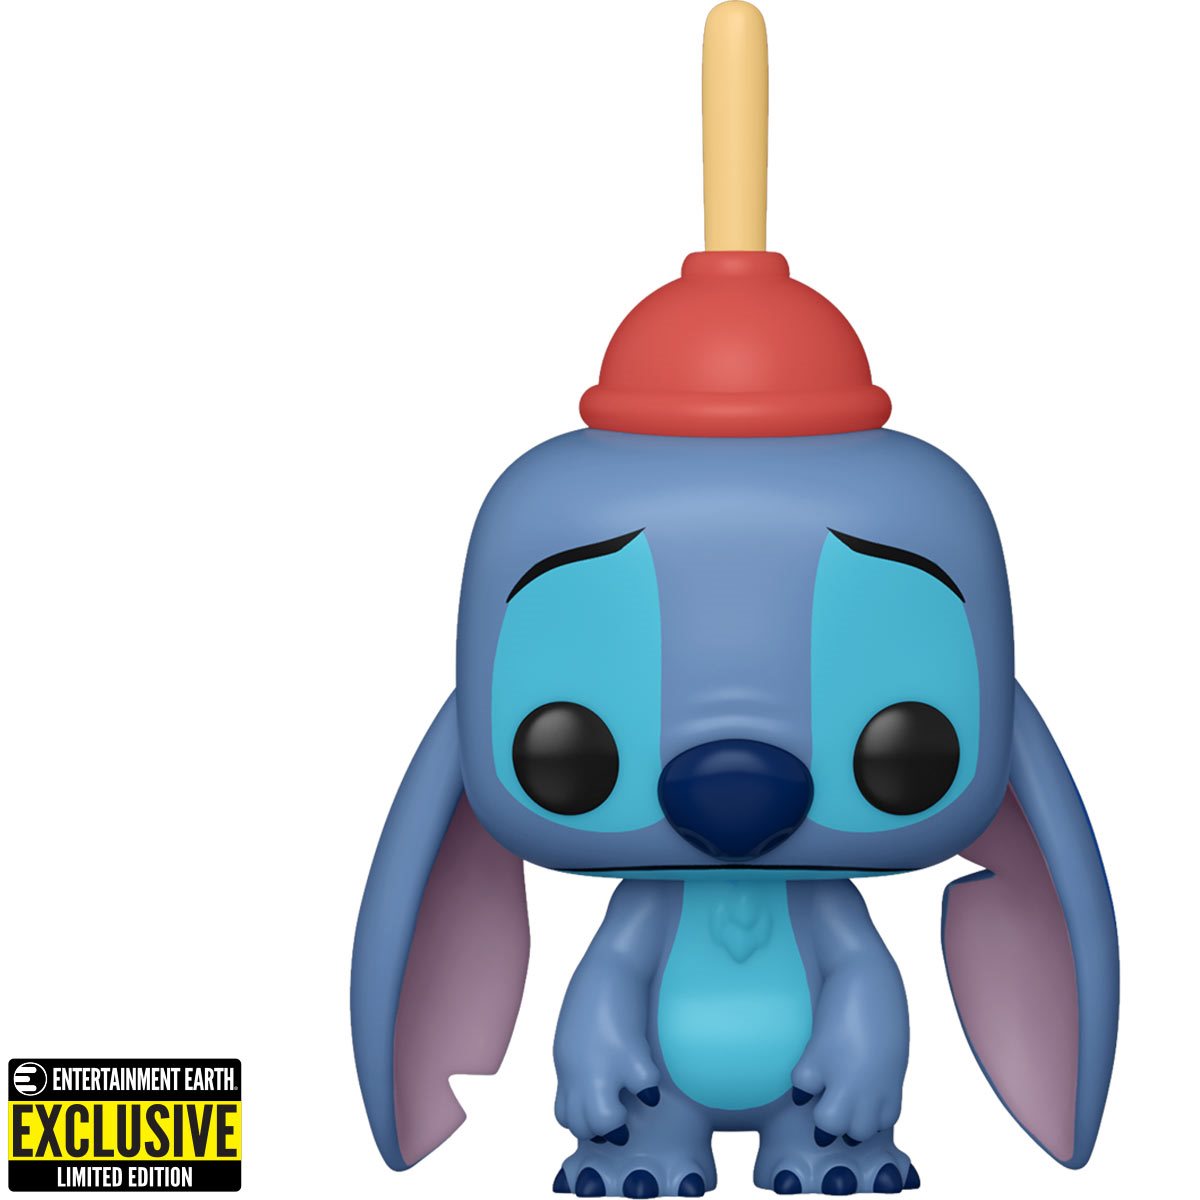 Lilo & Stitch Stitch with Plunger Entertainment Earth Exclusive